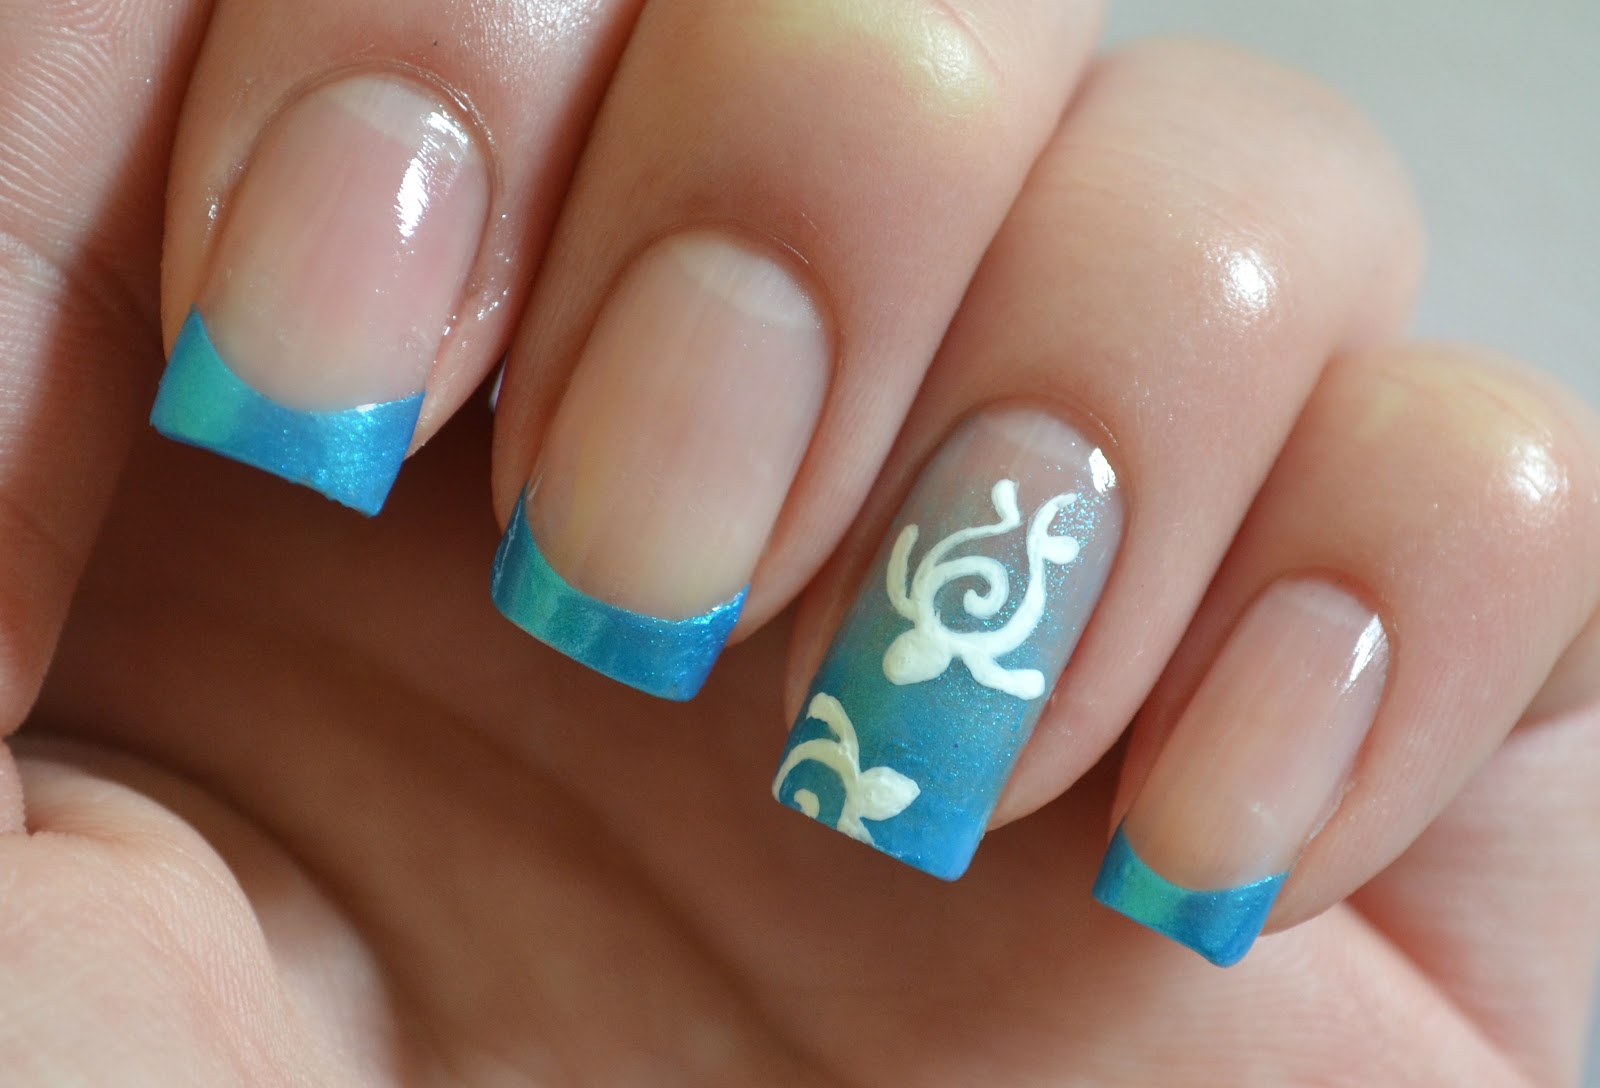 2. Tropical Themed Nail Art for Summer - wide 5